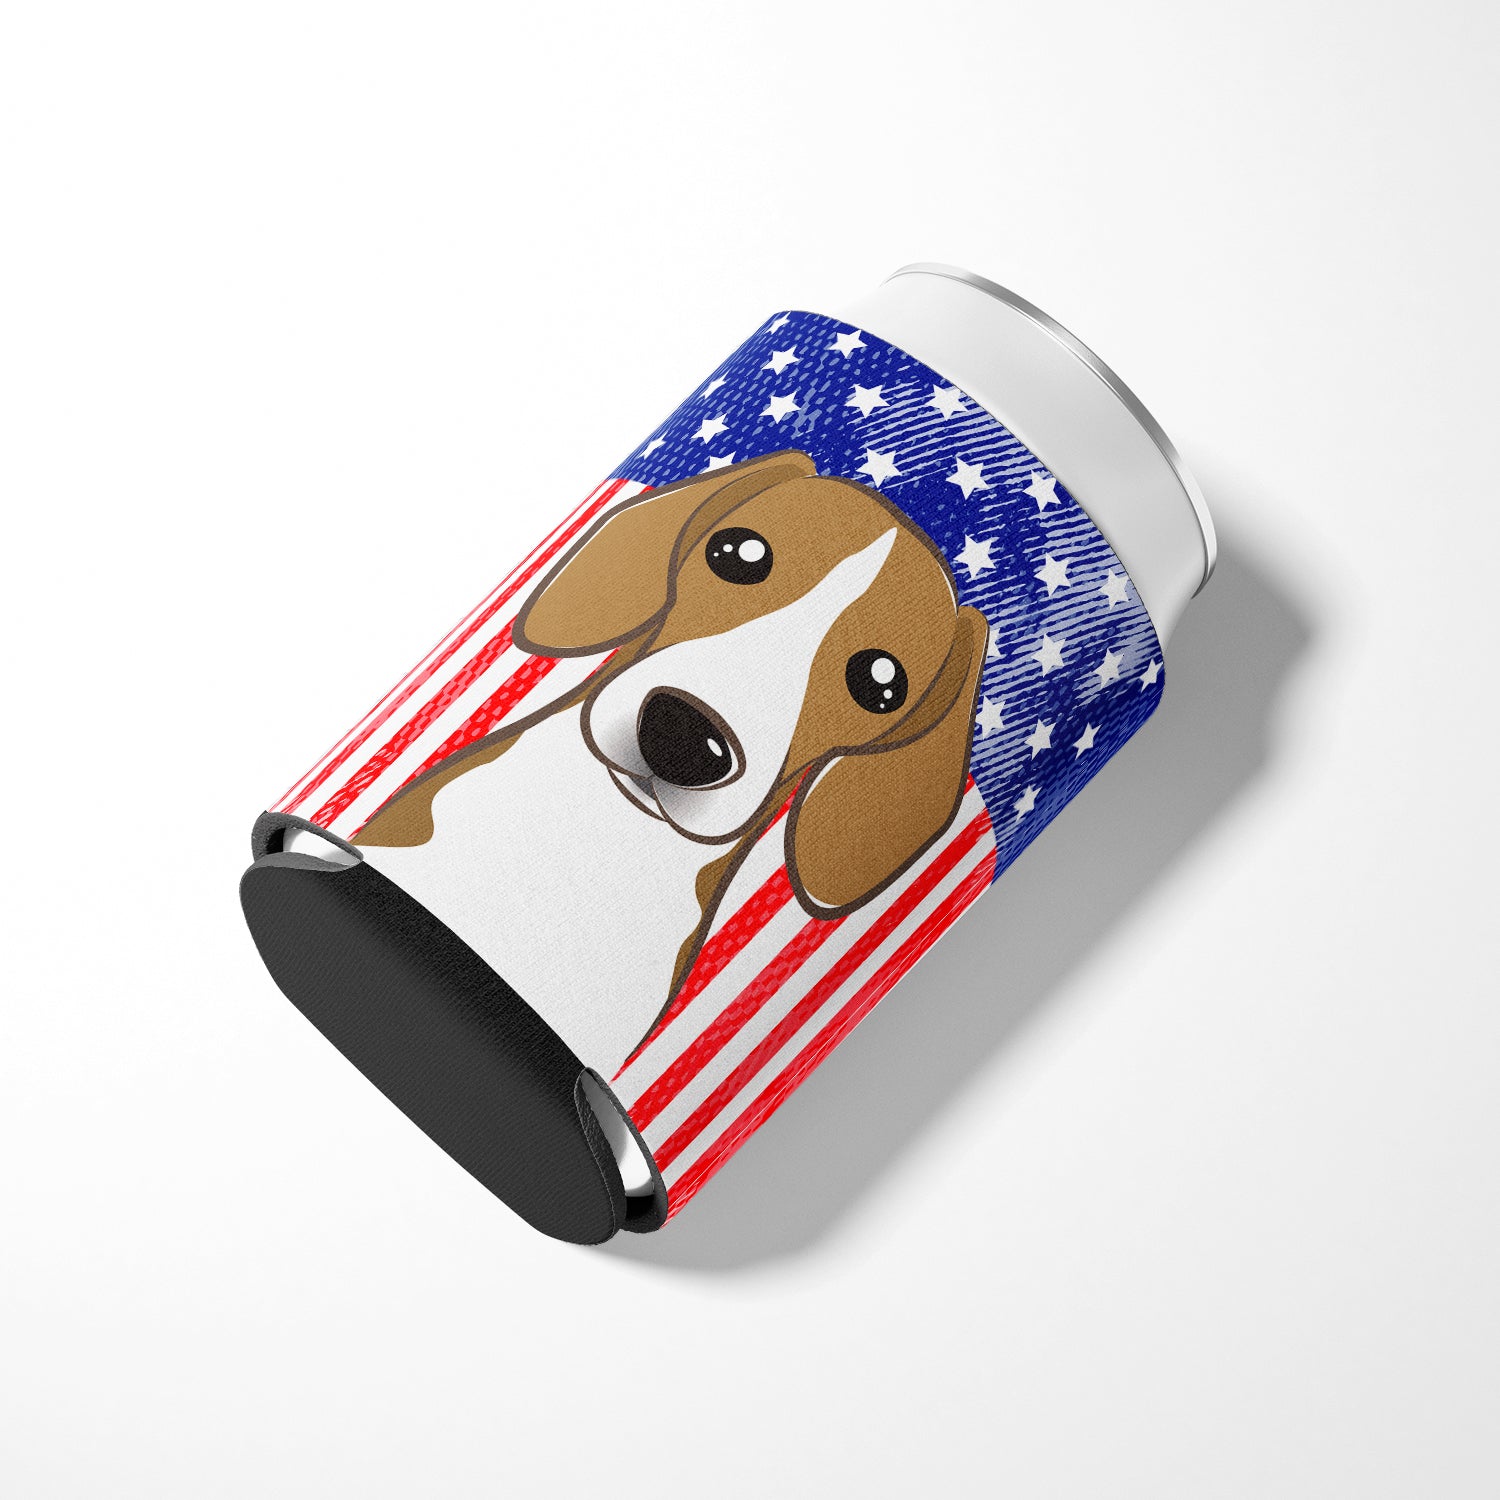 American Flag and Beagle Can or Bottle Hugger BB2169CC